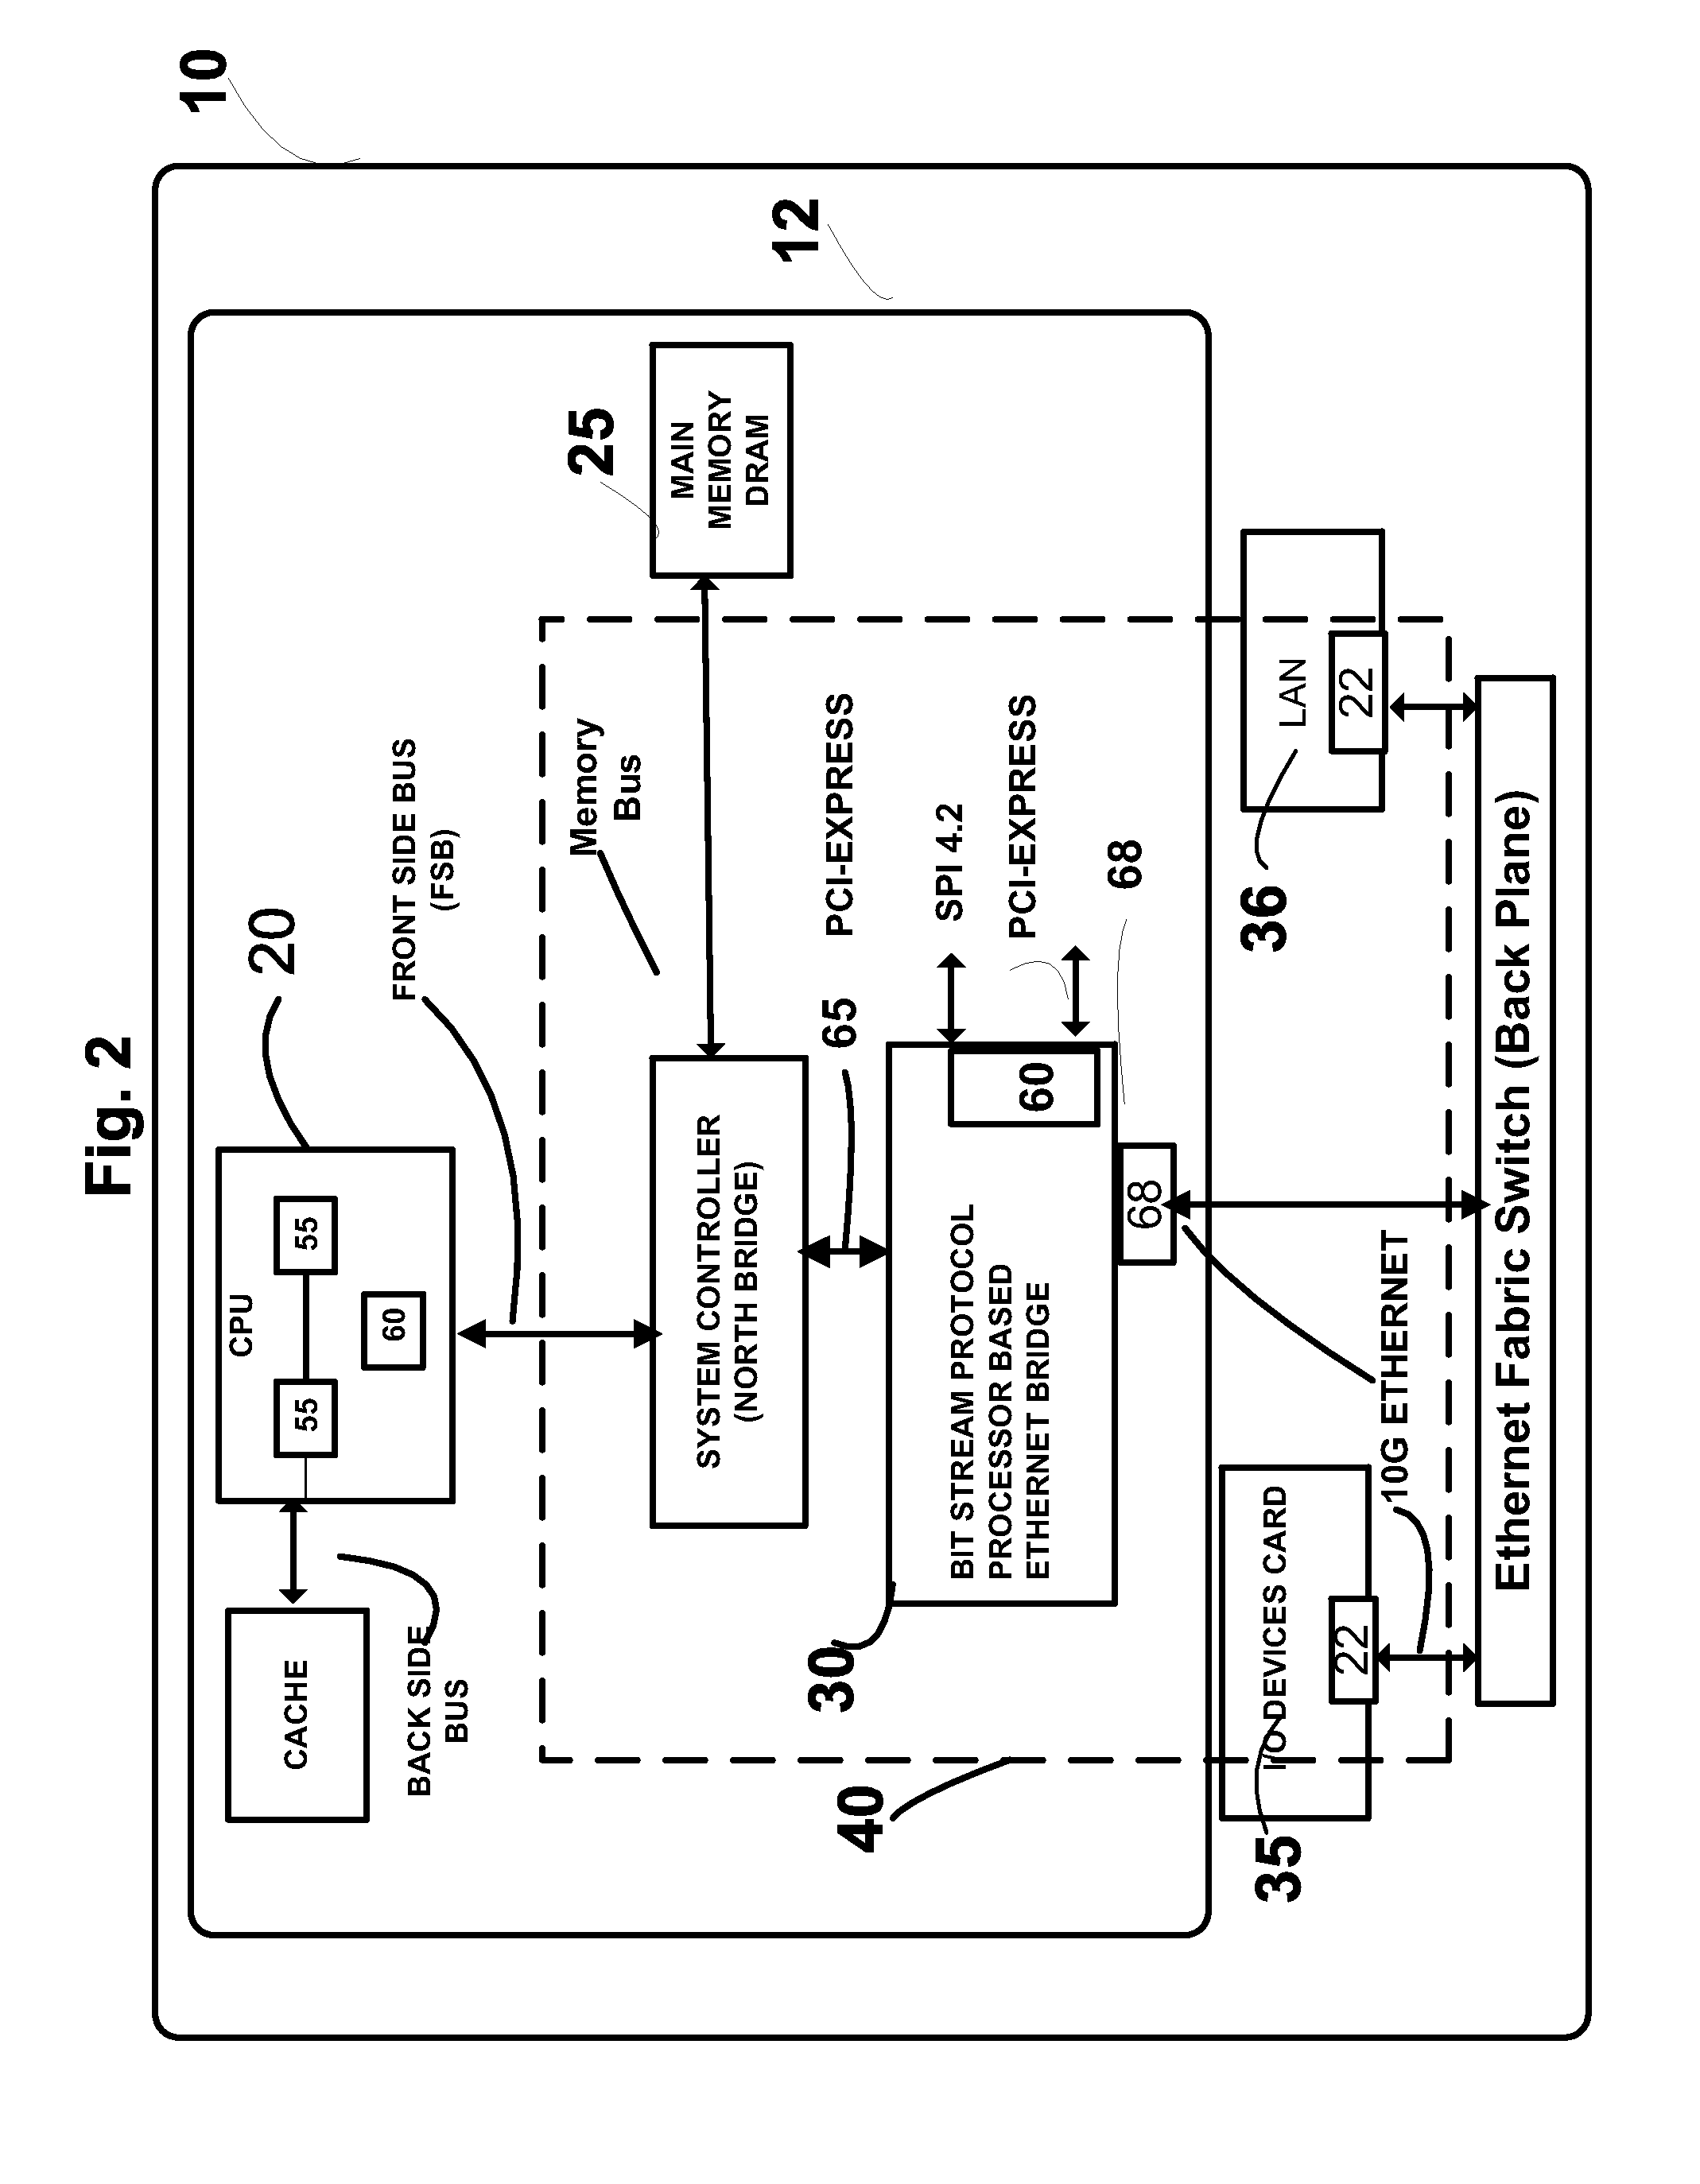 Telecommunication and computing platforms with serial packet switched integrated memory access technology